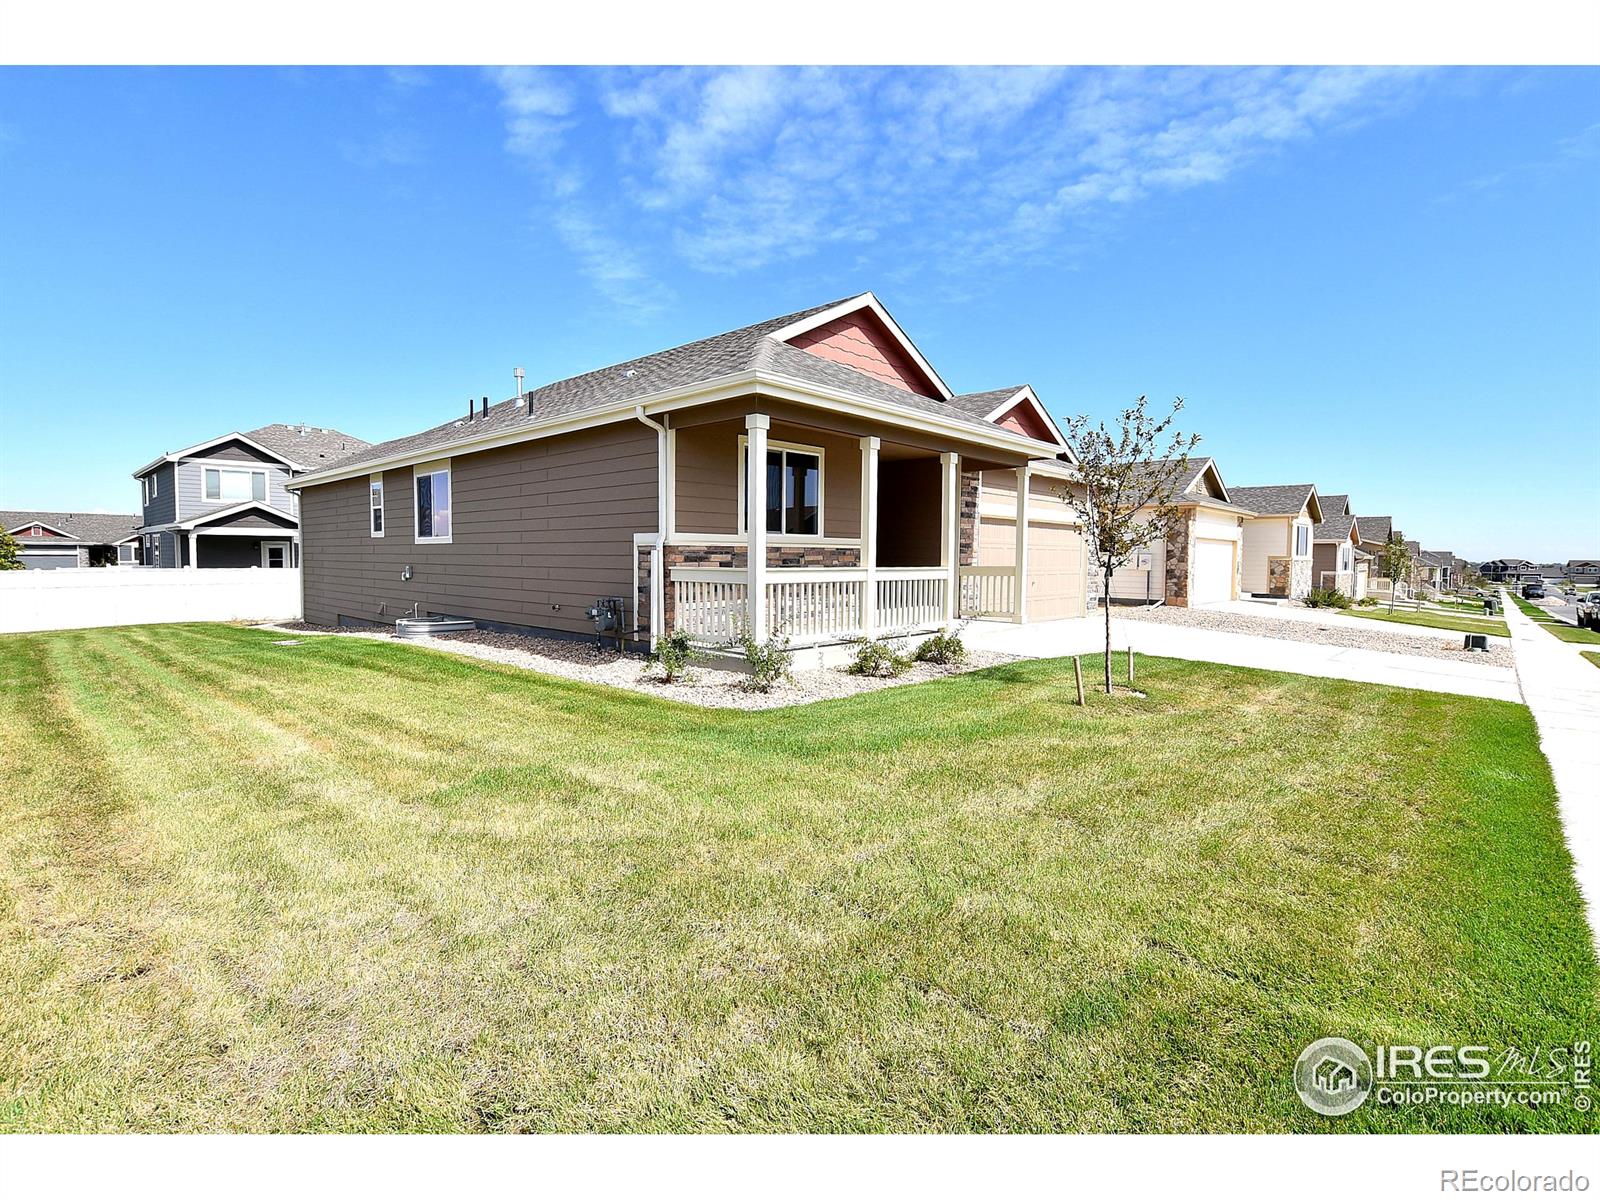 405  67th avenue, Greeley sold home. Closed on 2024-05-07 for $442,860.